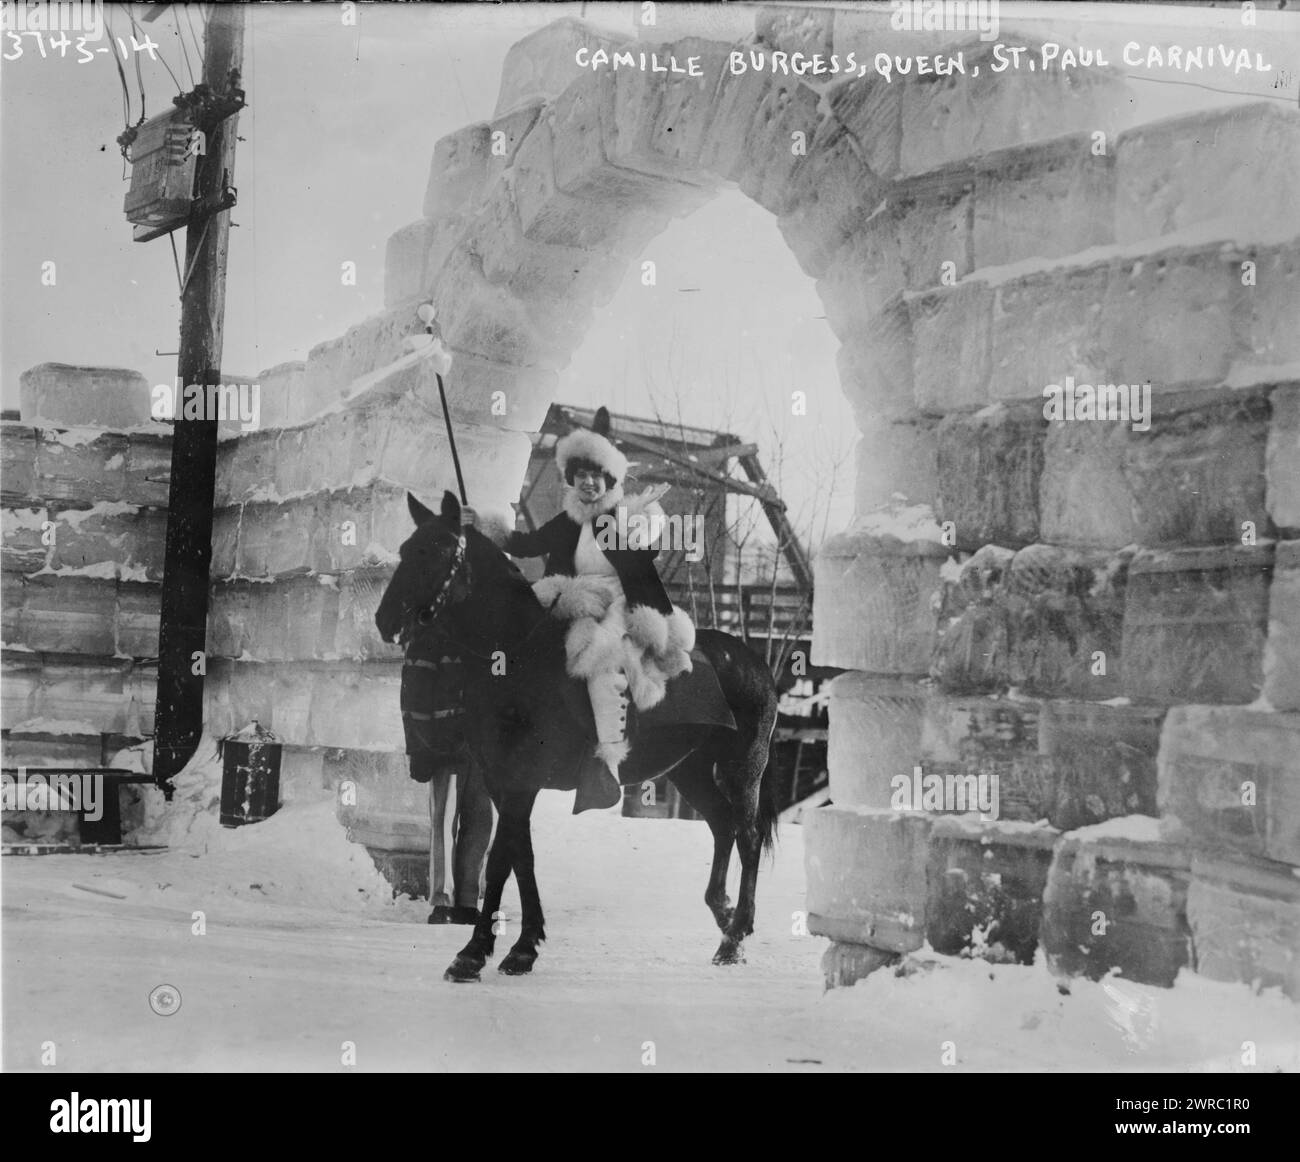 Camille Burgess, Queen, St. Paul Carnival, Photograph shows Miss Camille Burgess, Queen of the St. Paul Outdoor Sports Carnival giong into the ice fort on Harriet Island under an ice block arch, St. Paul, Minnesota., 1916, Glass negatives, 1 negative: glass Stock Photo